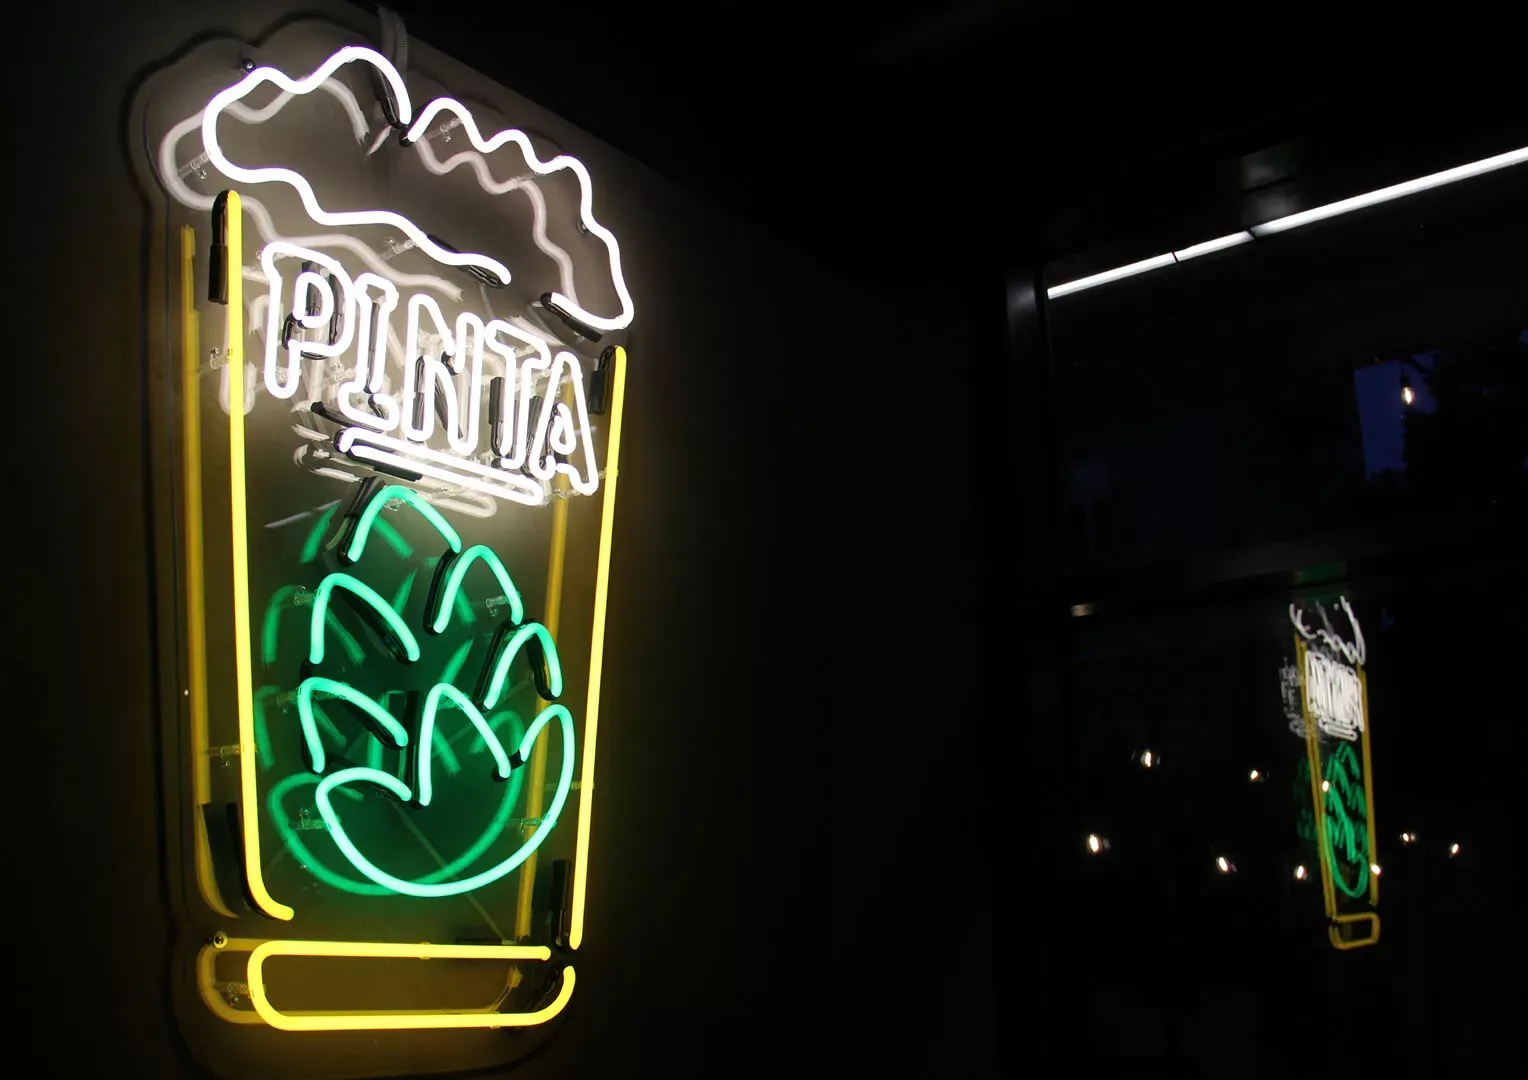 Pinta - neon sign in the shape of a glass along with the inscription